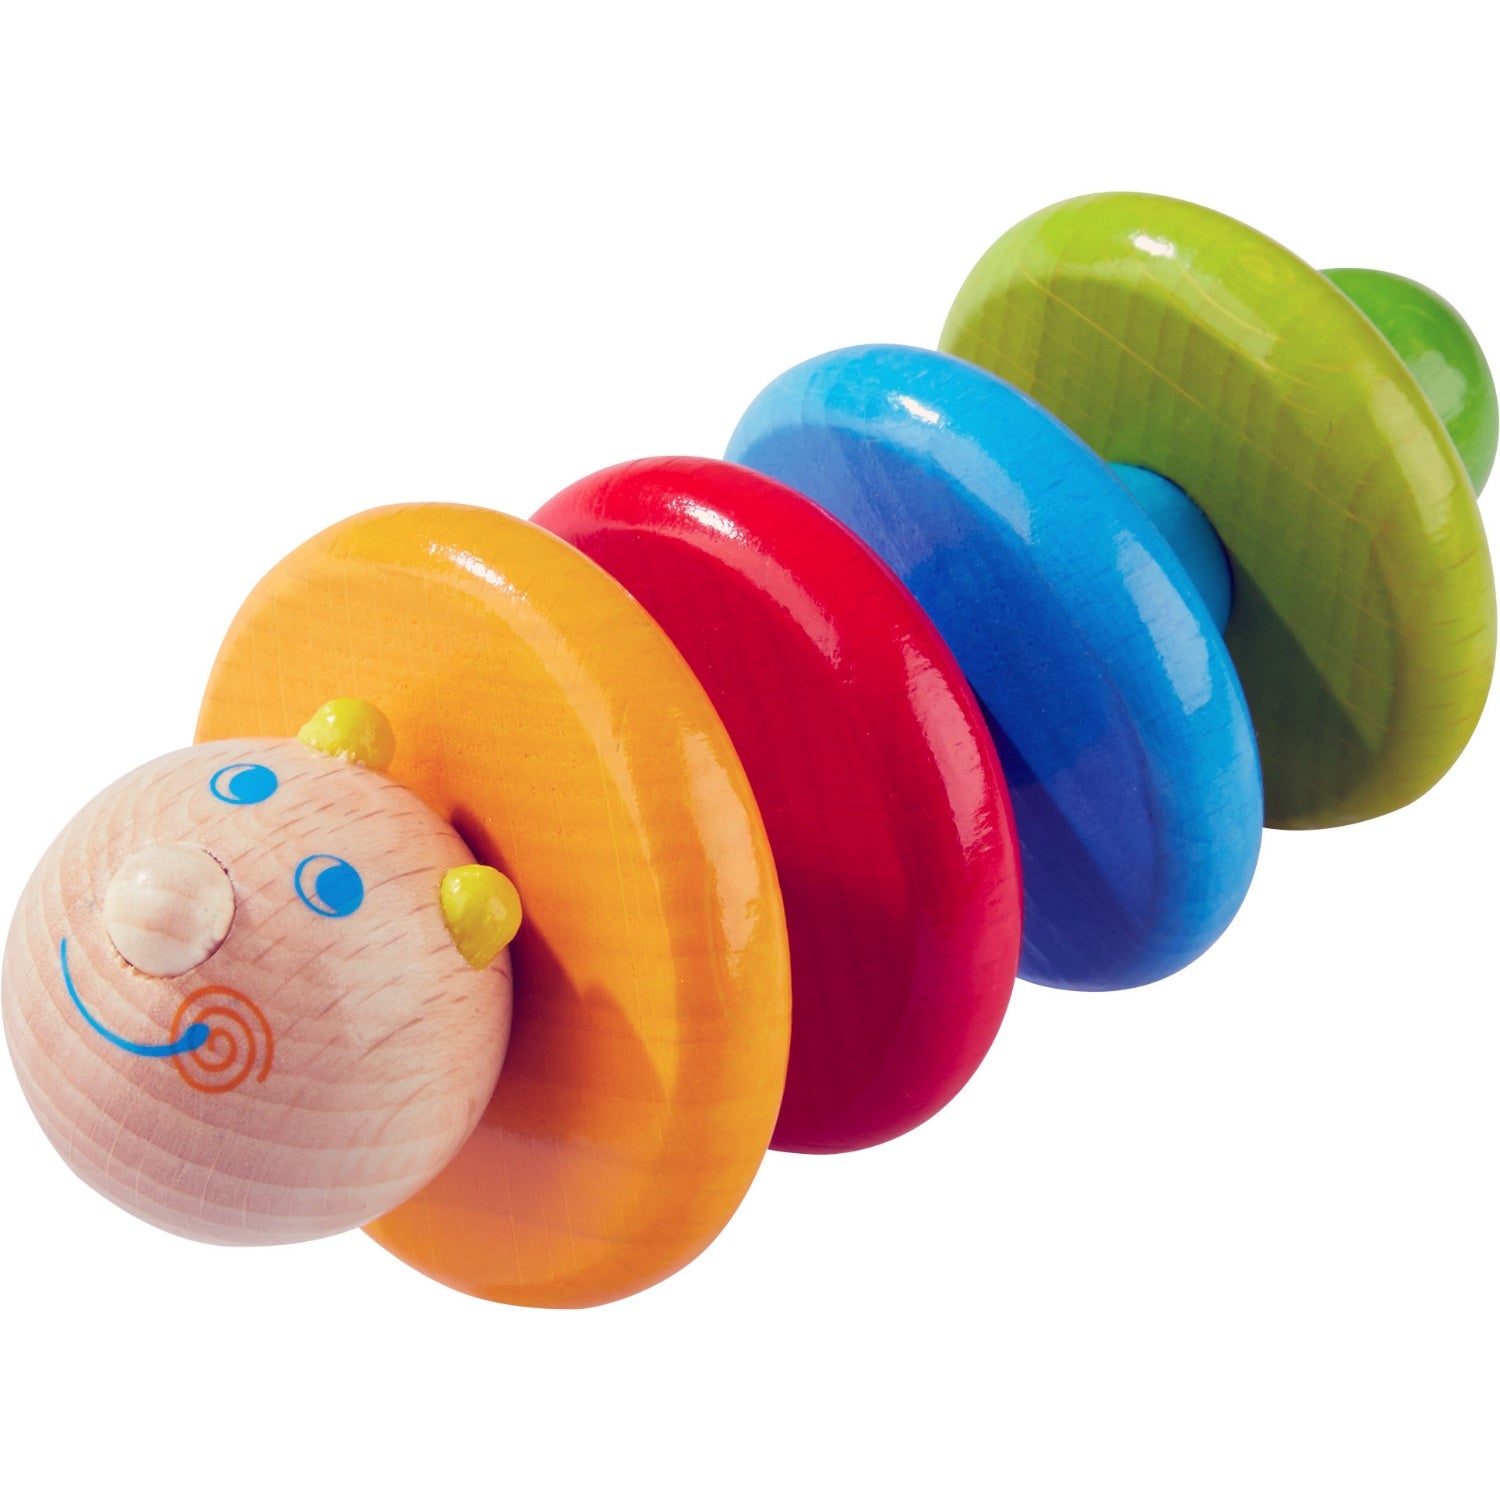 Caterpillar Wooden Baby Clutching Toy